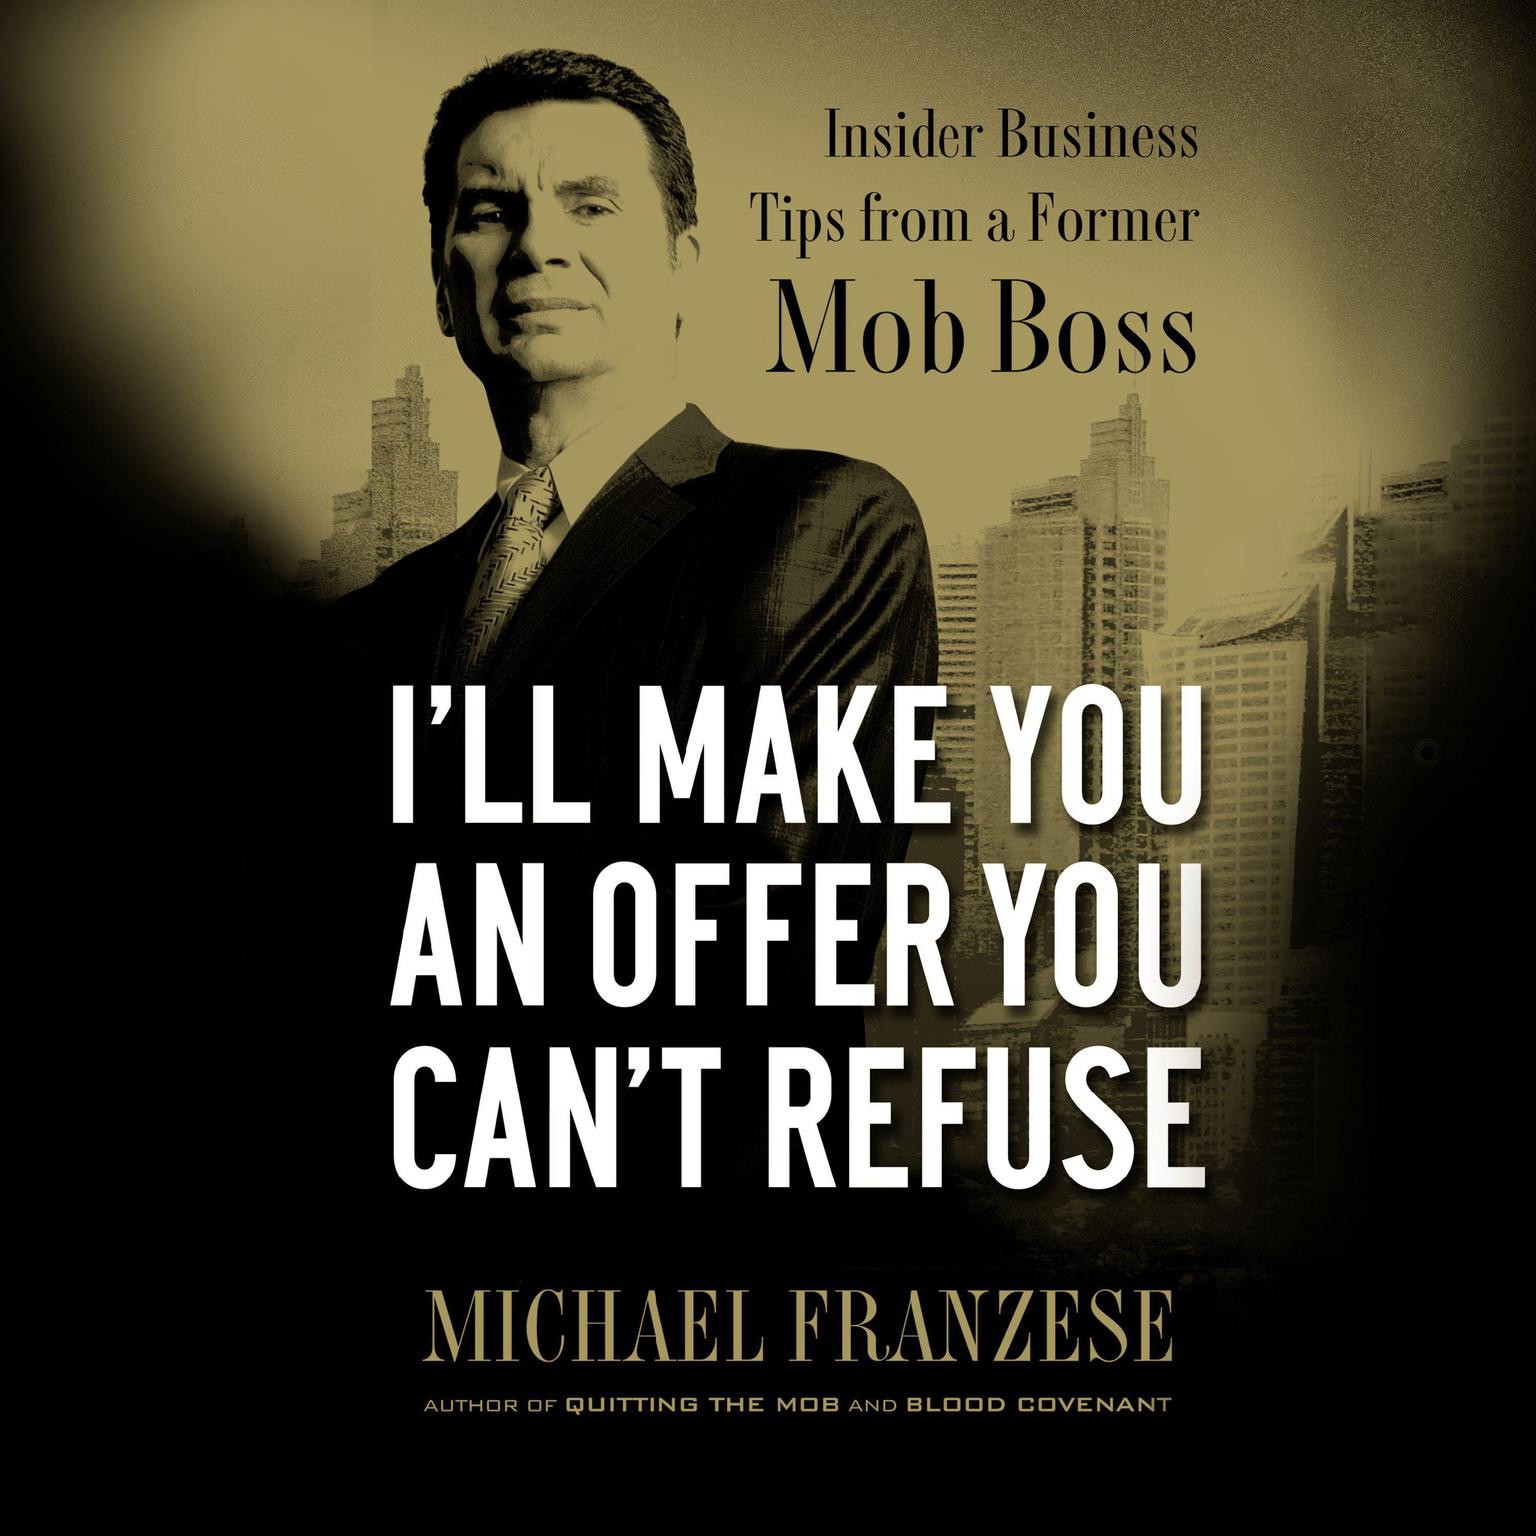 Ill Make You an Offer You Cant Refuse: Insider Business Tips from a Former Mob Boss Audiobook, by Michael Franzese